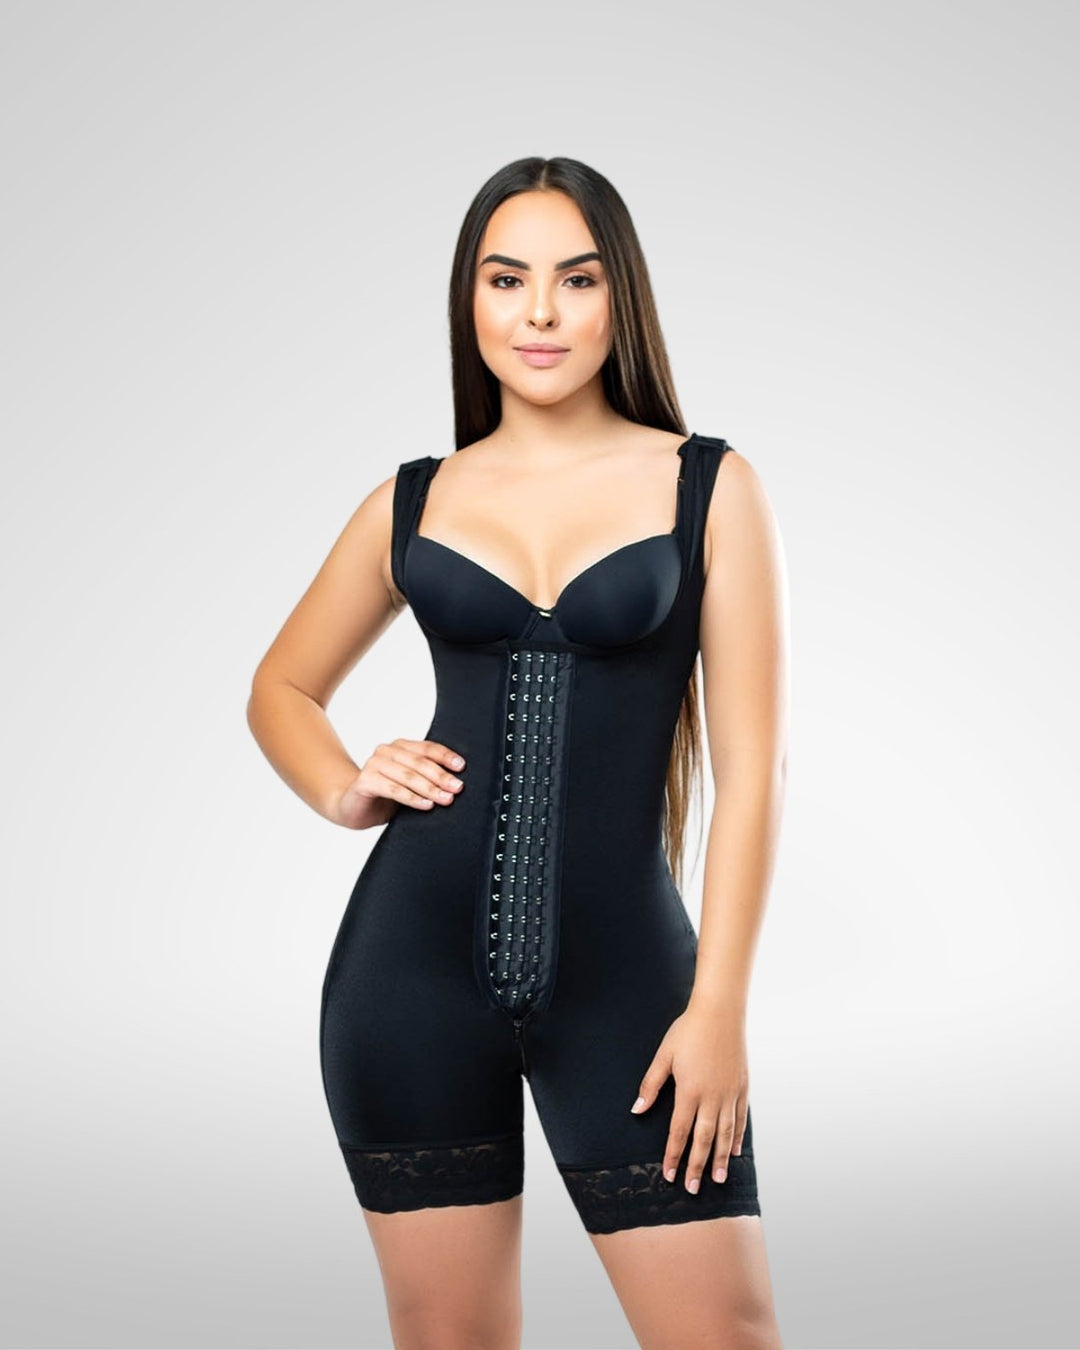 Modern Sensation 530- Long Girdle Without Clasp or Closures